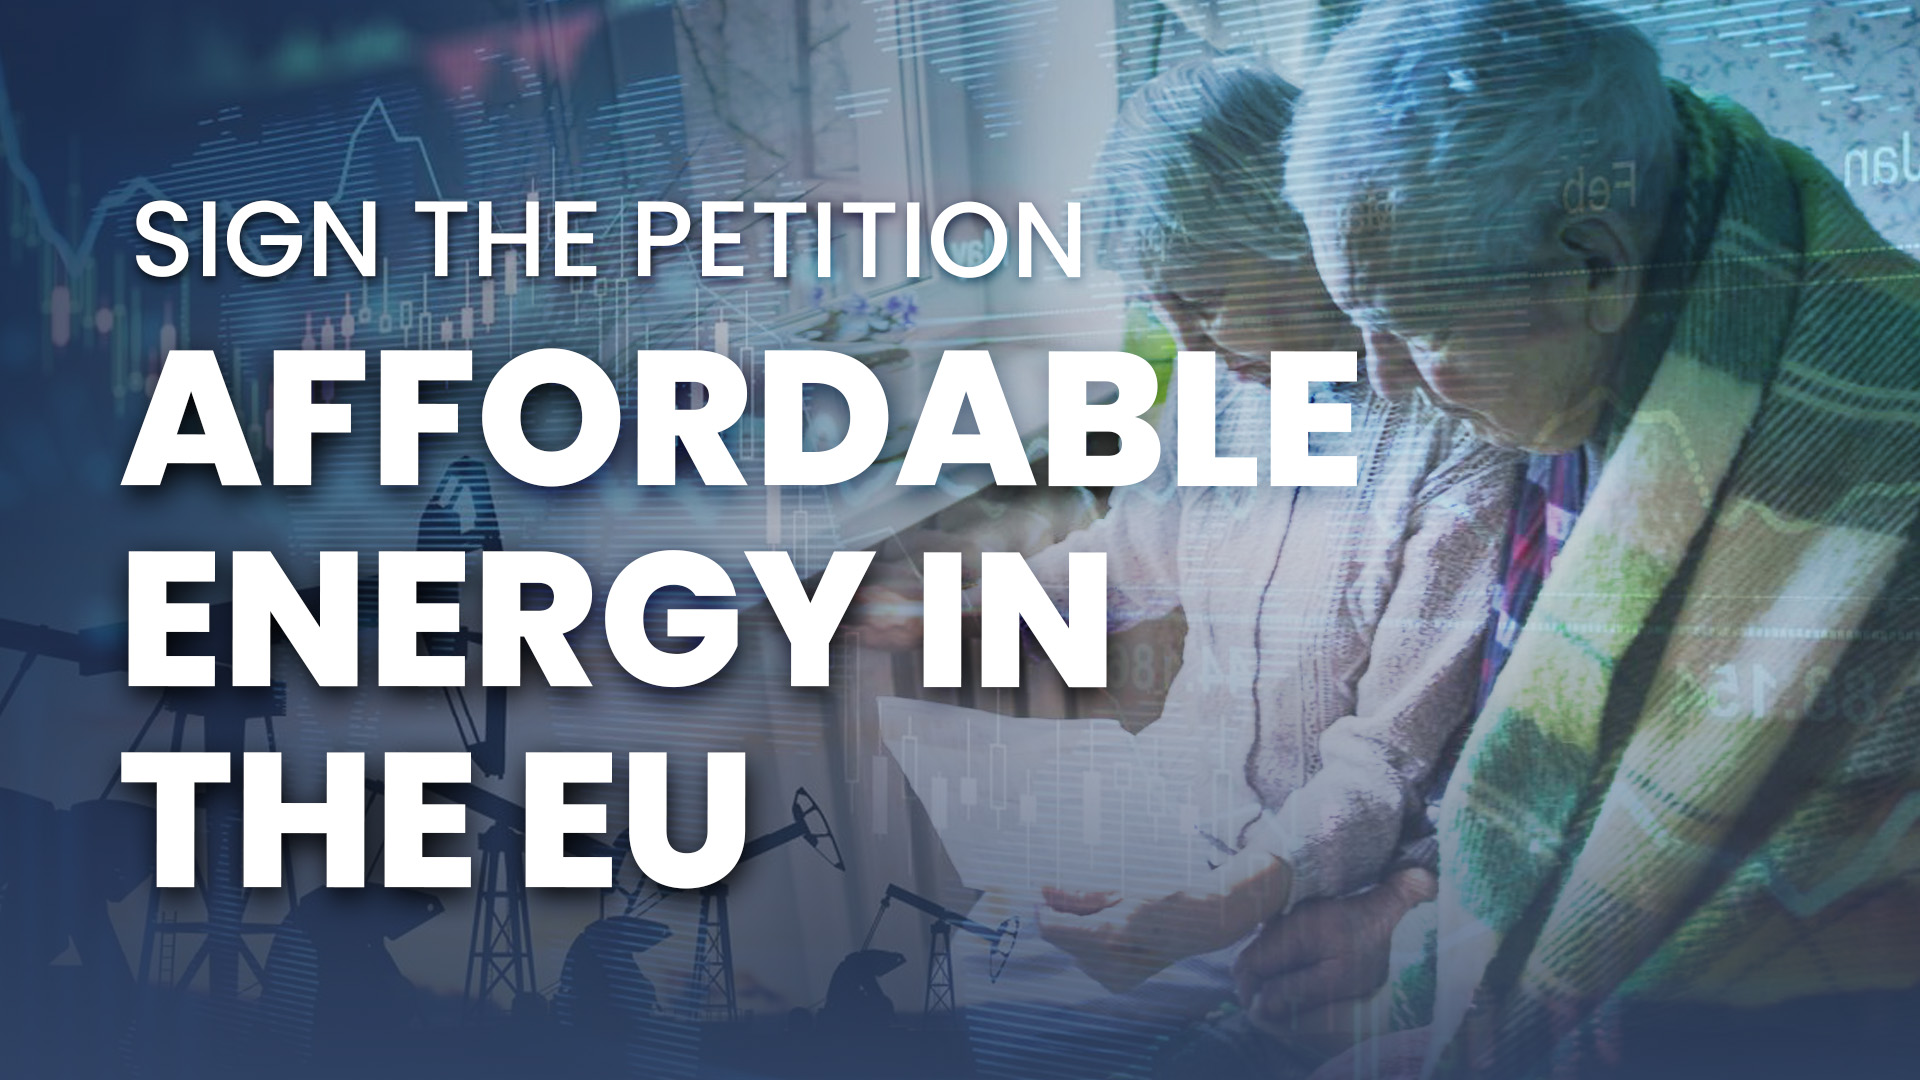 A petition for affordable energy in the EU